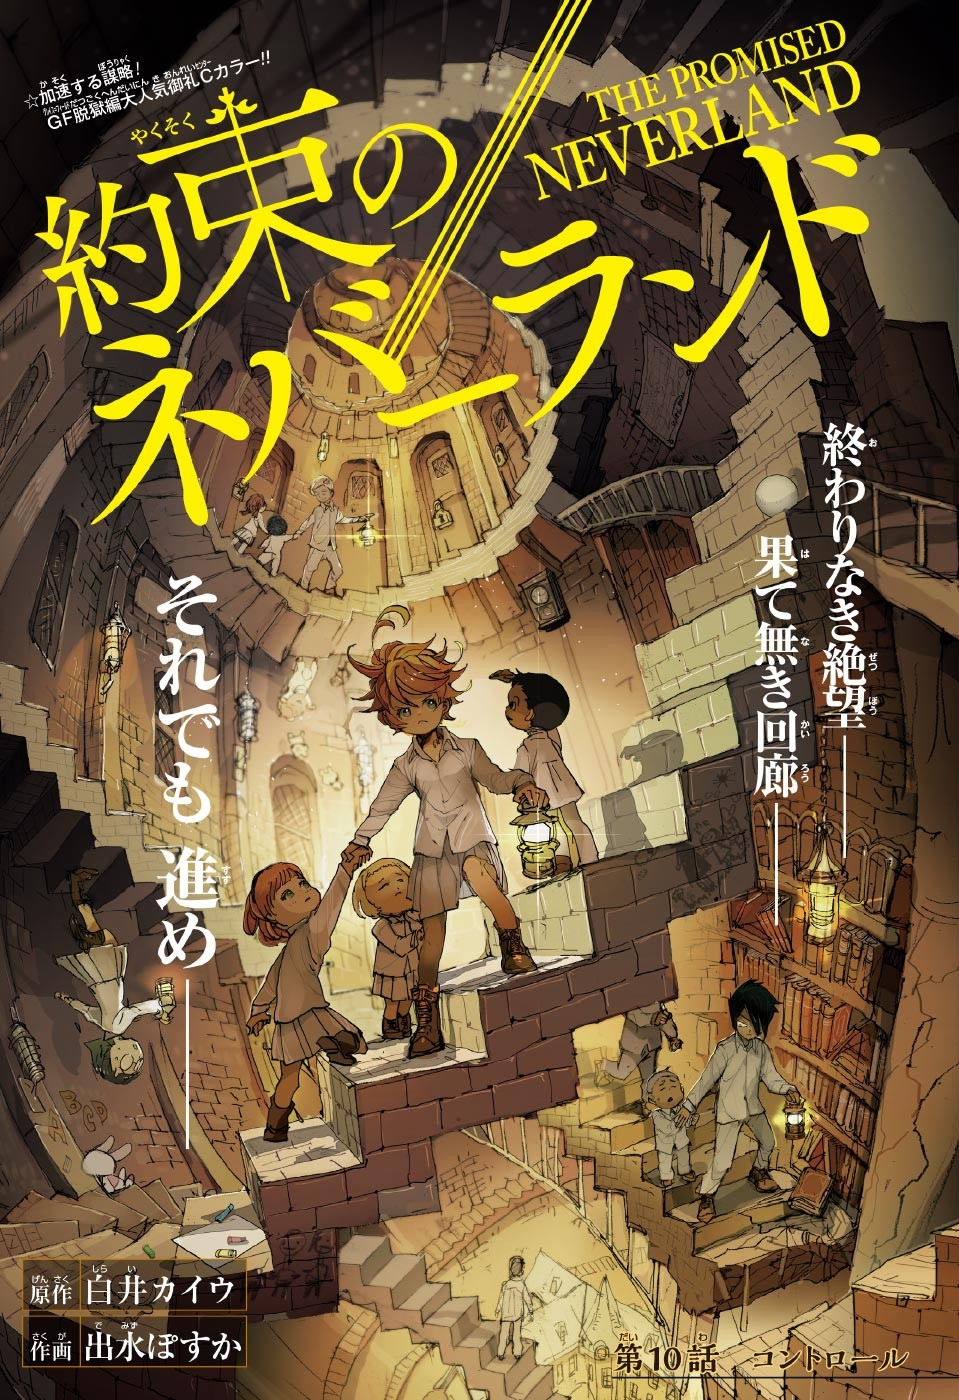 Why The Promised Neverland Fell Short of Its Dystopian Predecessor